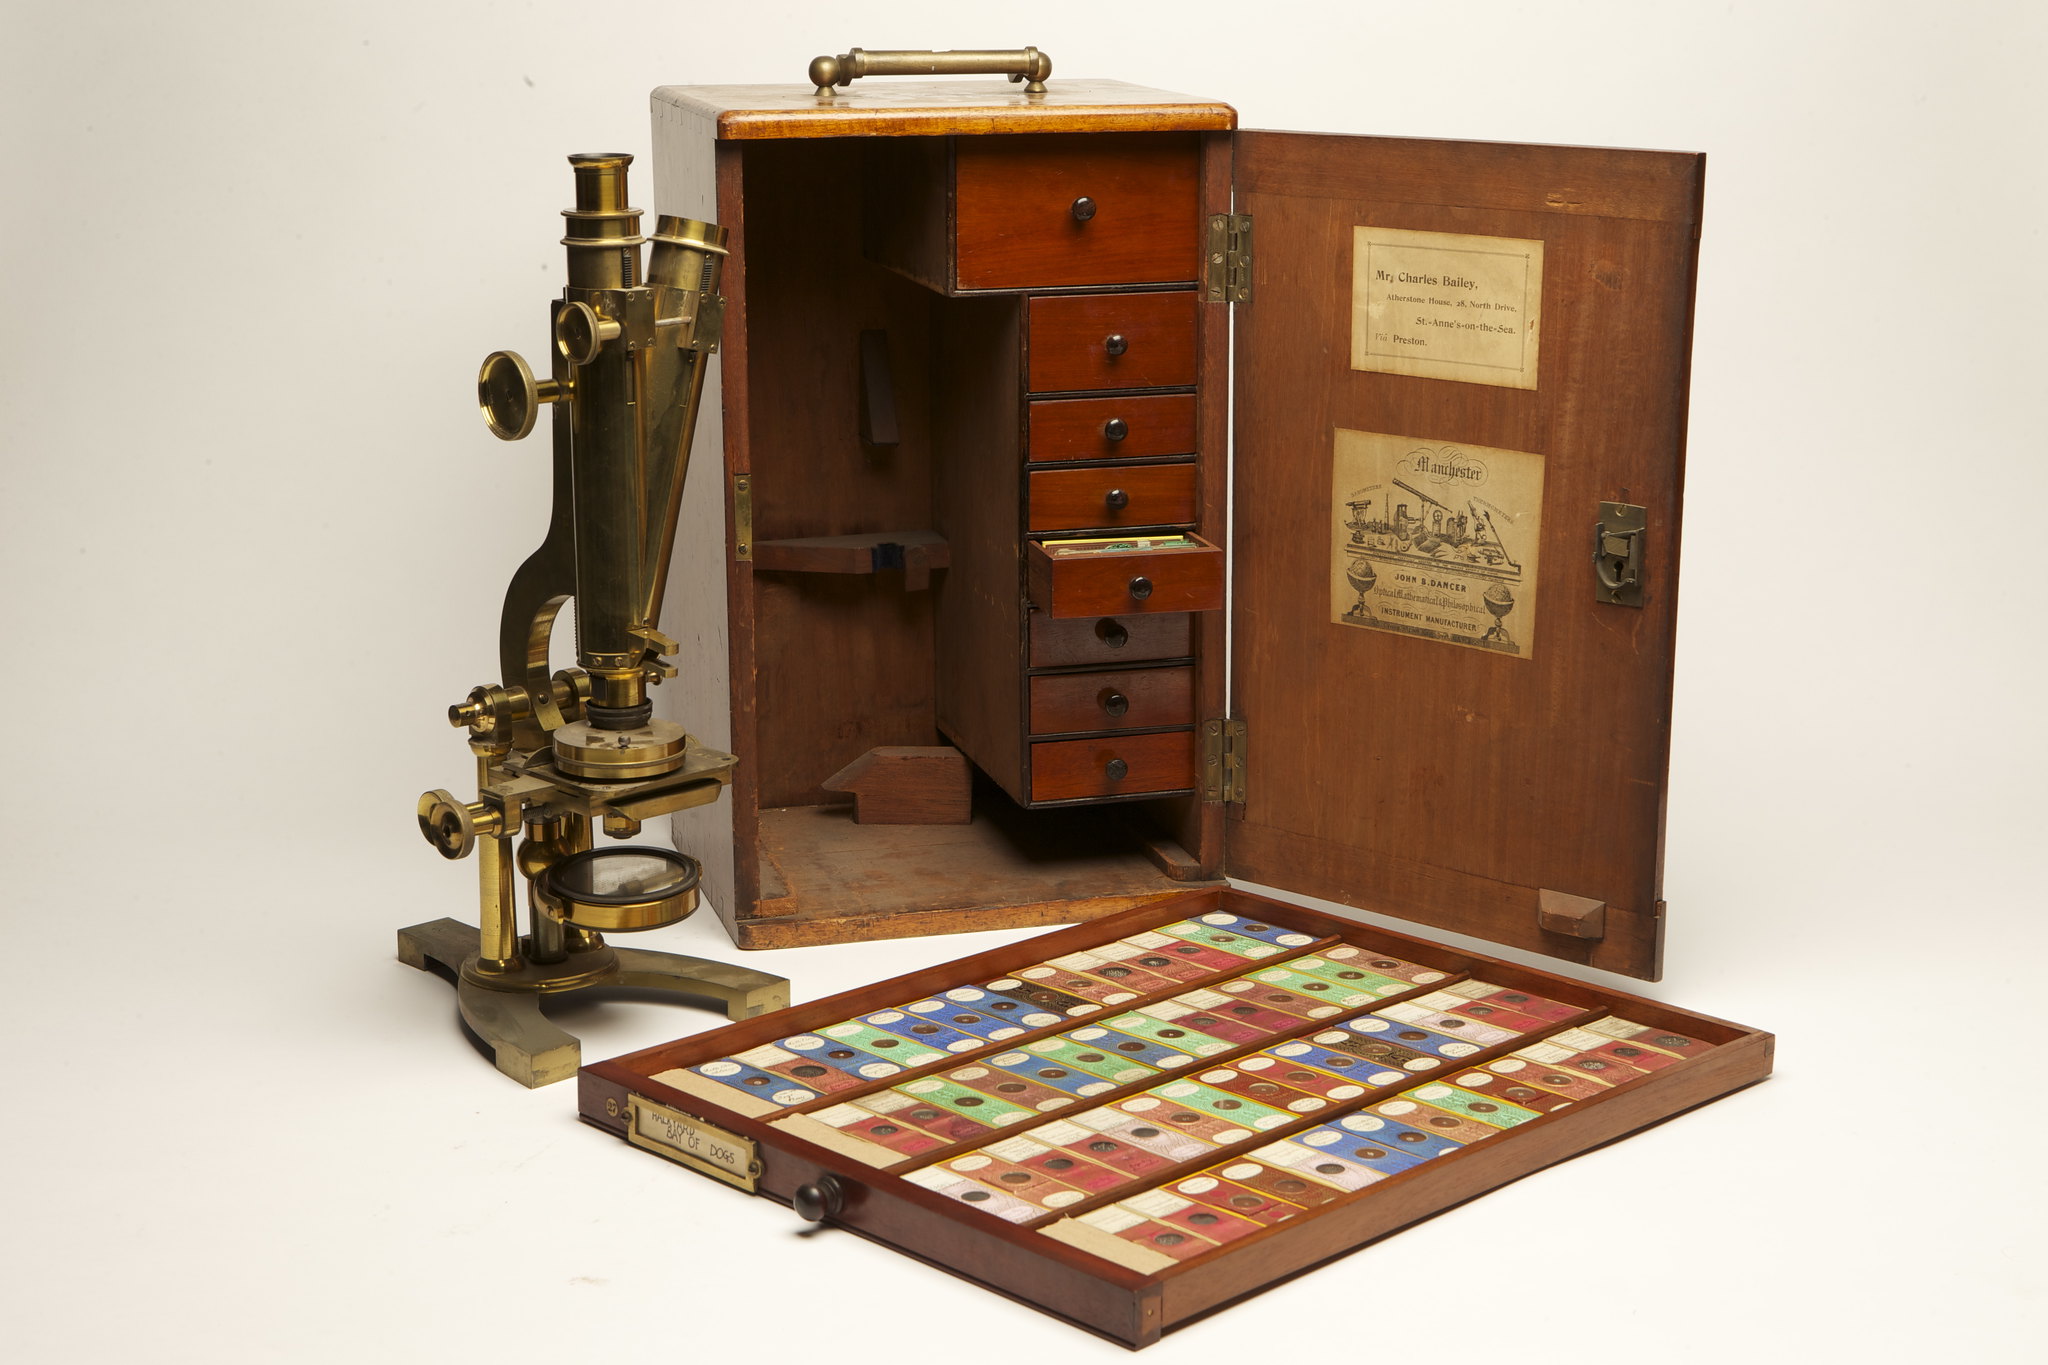 An old fashioned boxed microscope and a collection of nature slides.